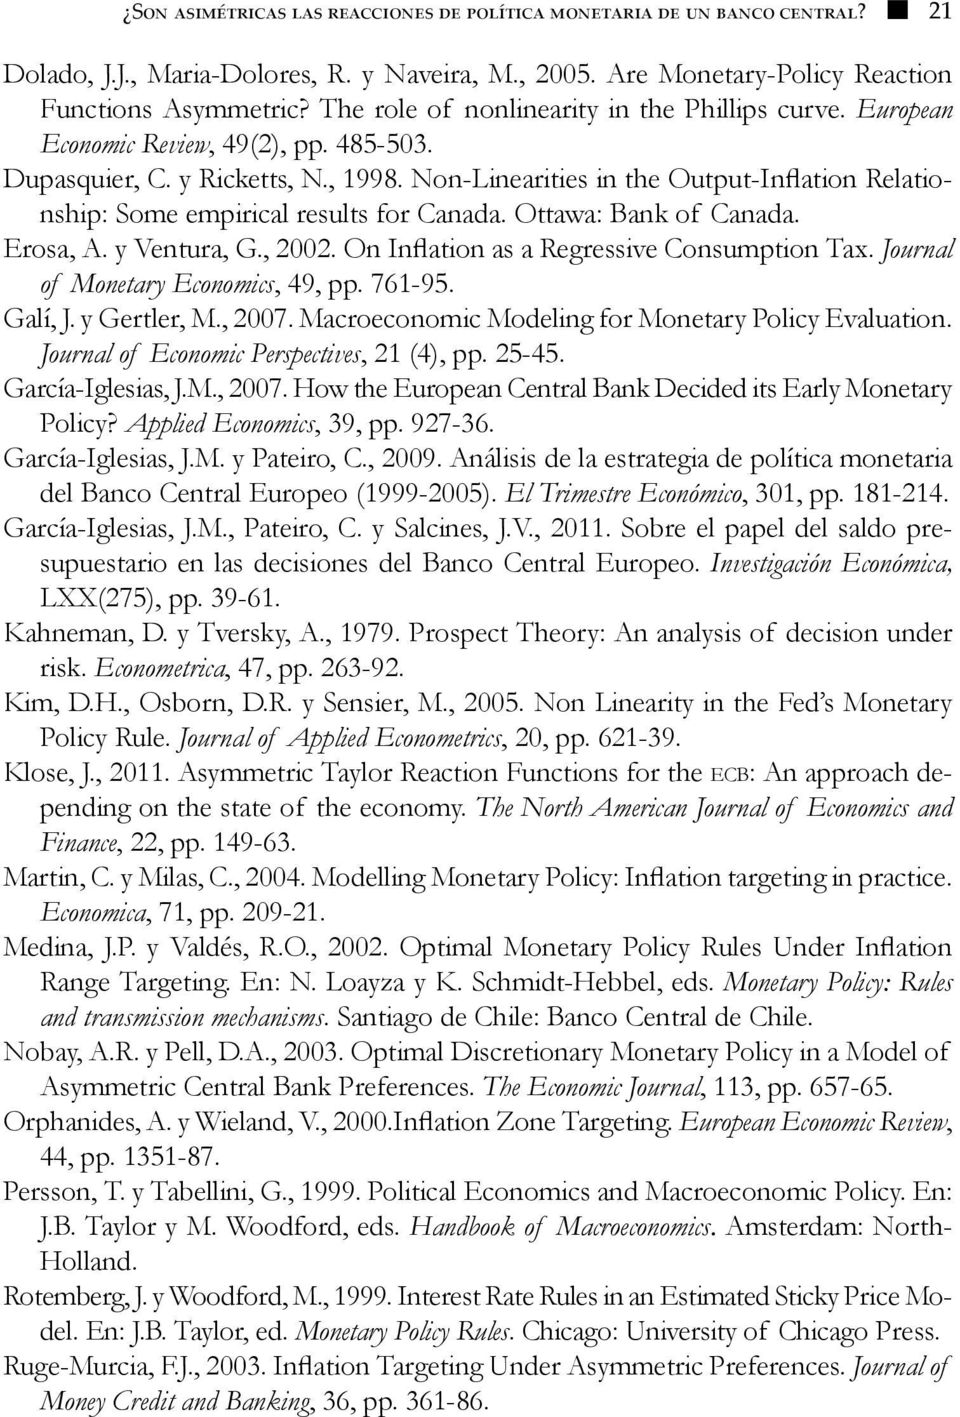 On Inflaion as a Regressive Consumpion Tax. Journal of Moneary Economics, 49, pp. 761-95. Galí, J. y Gerler, M., 007. Macroeconomic Modeling for Moneary Policy Evaluaion.